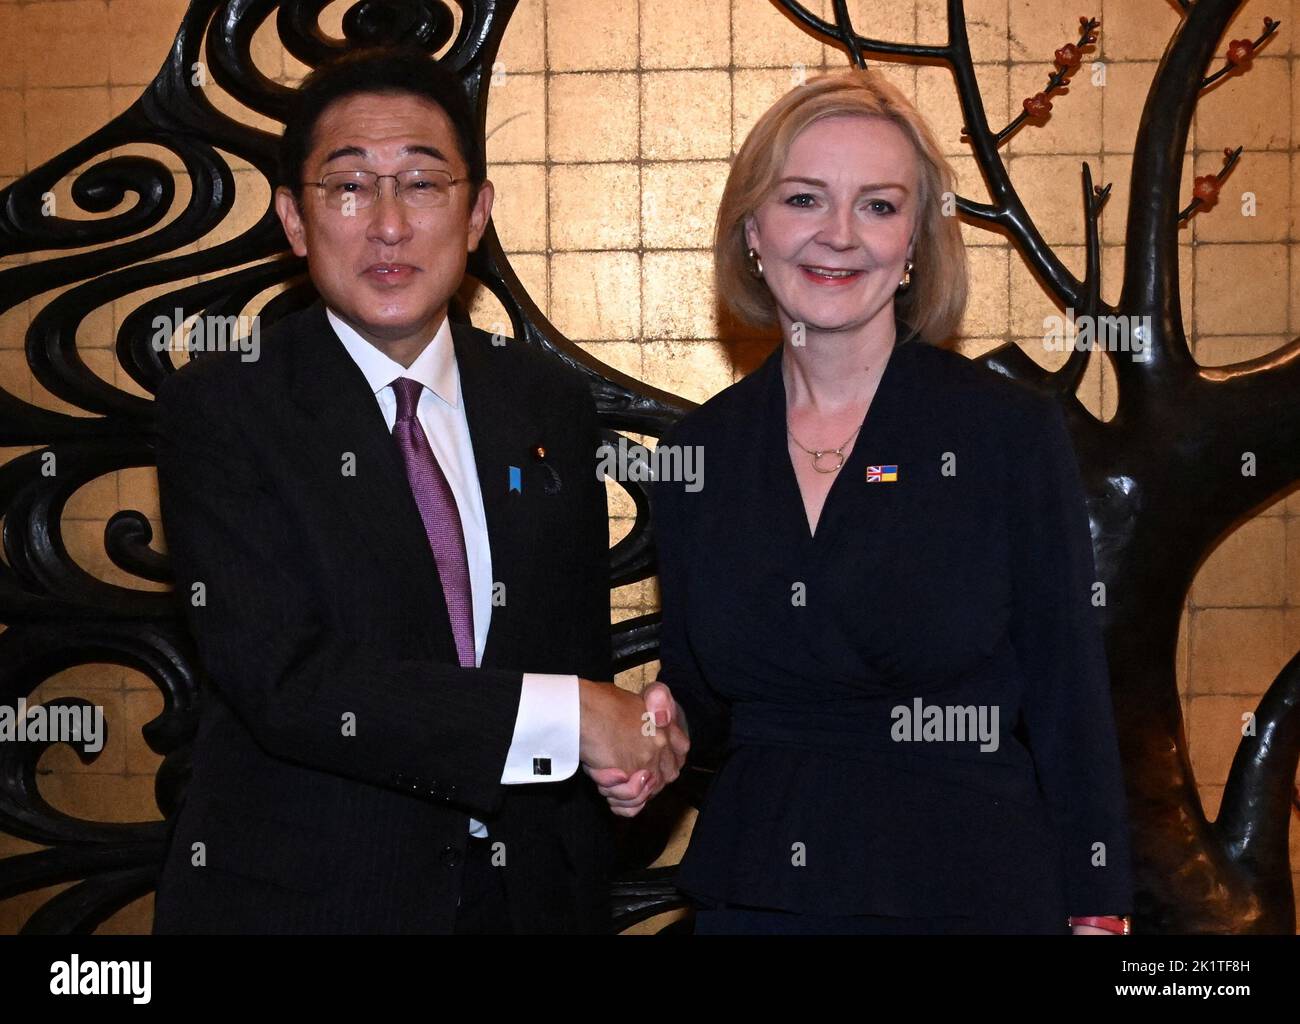 Prime Minister Liz Truss shake hands with Prime Minister of Japan, Fumio Kishida, ahead of a lunch bilateral meeting at a Japanese restaurant during her visit to the US to attend the 77th UN General Assembly. Picture date: Tuesday September 20, 2022. Stock Photo